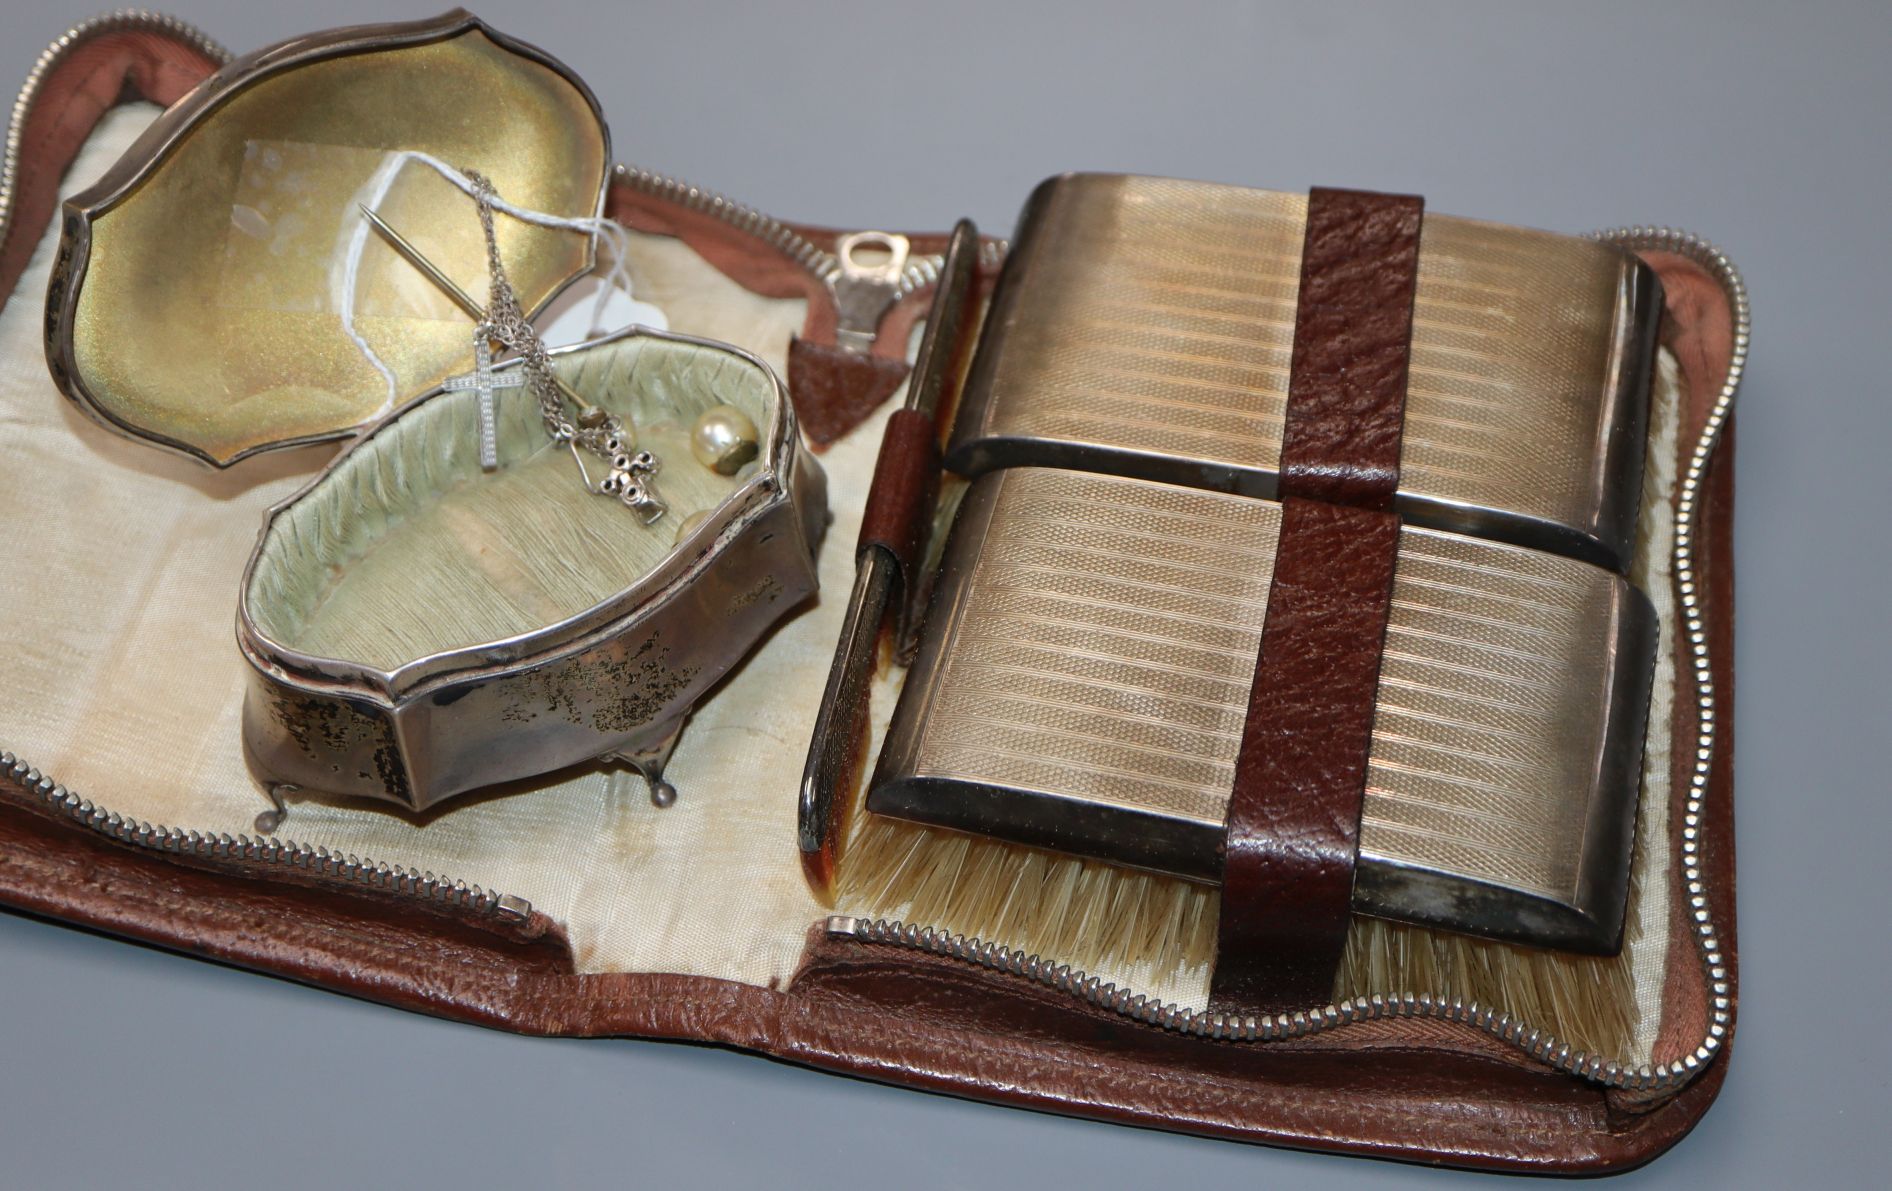 A gentlemen's silver-mounted grooming set in leather case and a silver engine-turned shaped oval